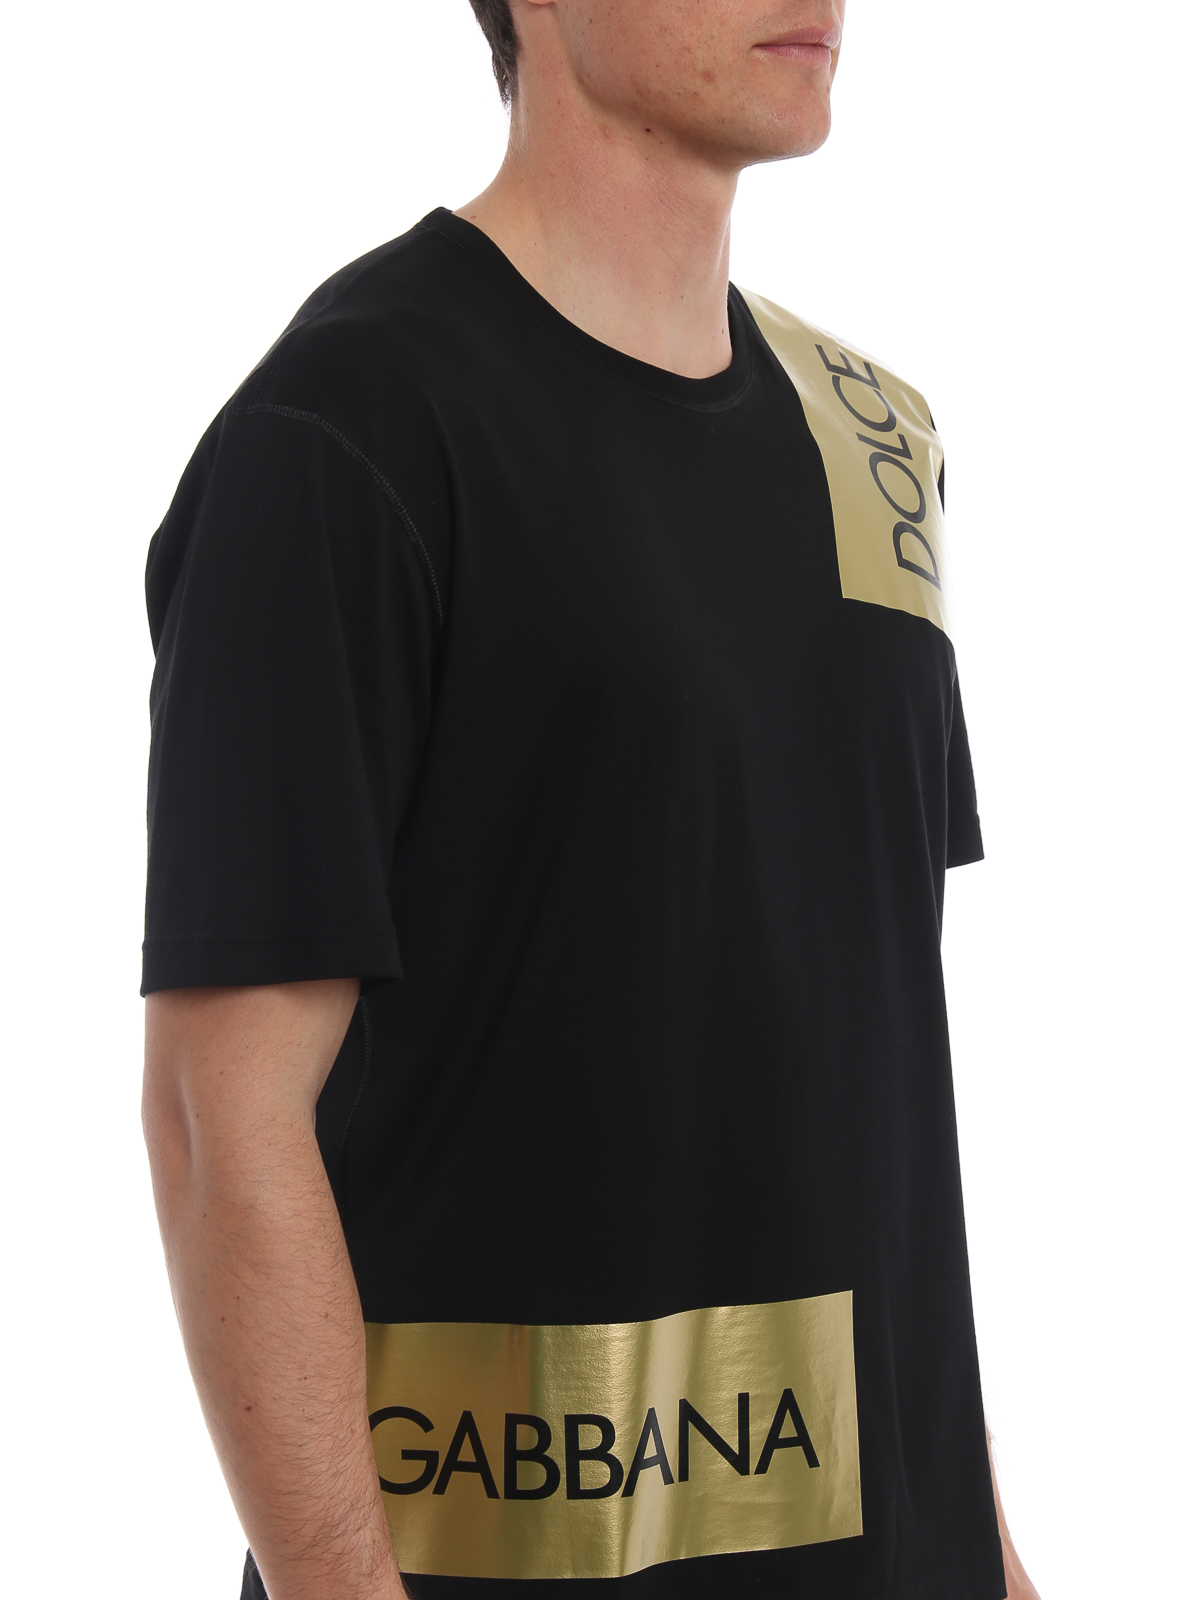 dolce and gabbana t shirts online